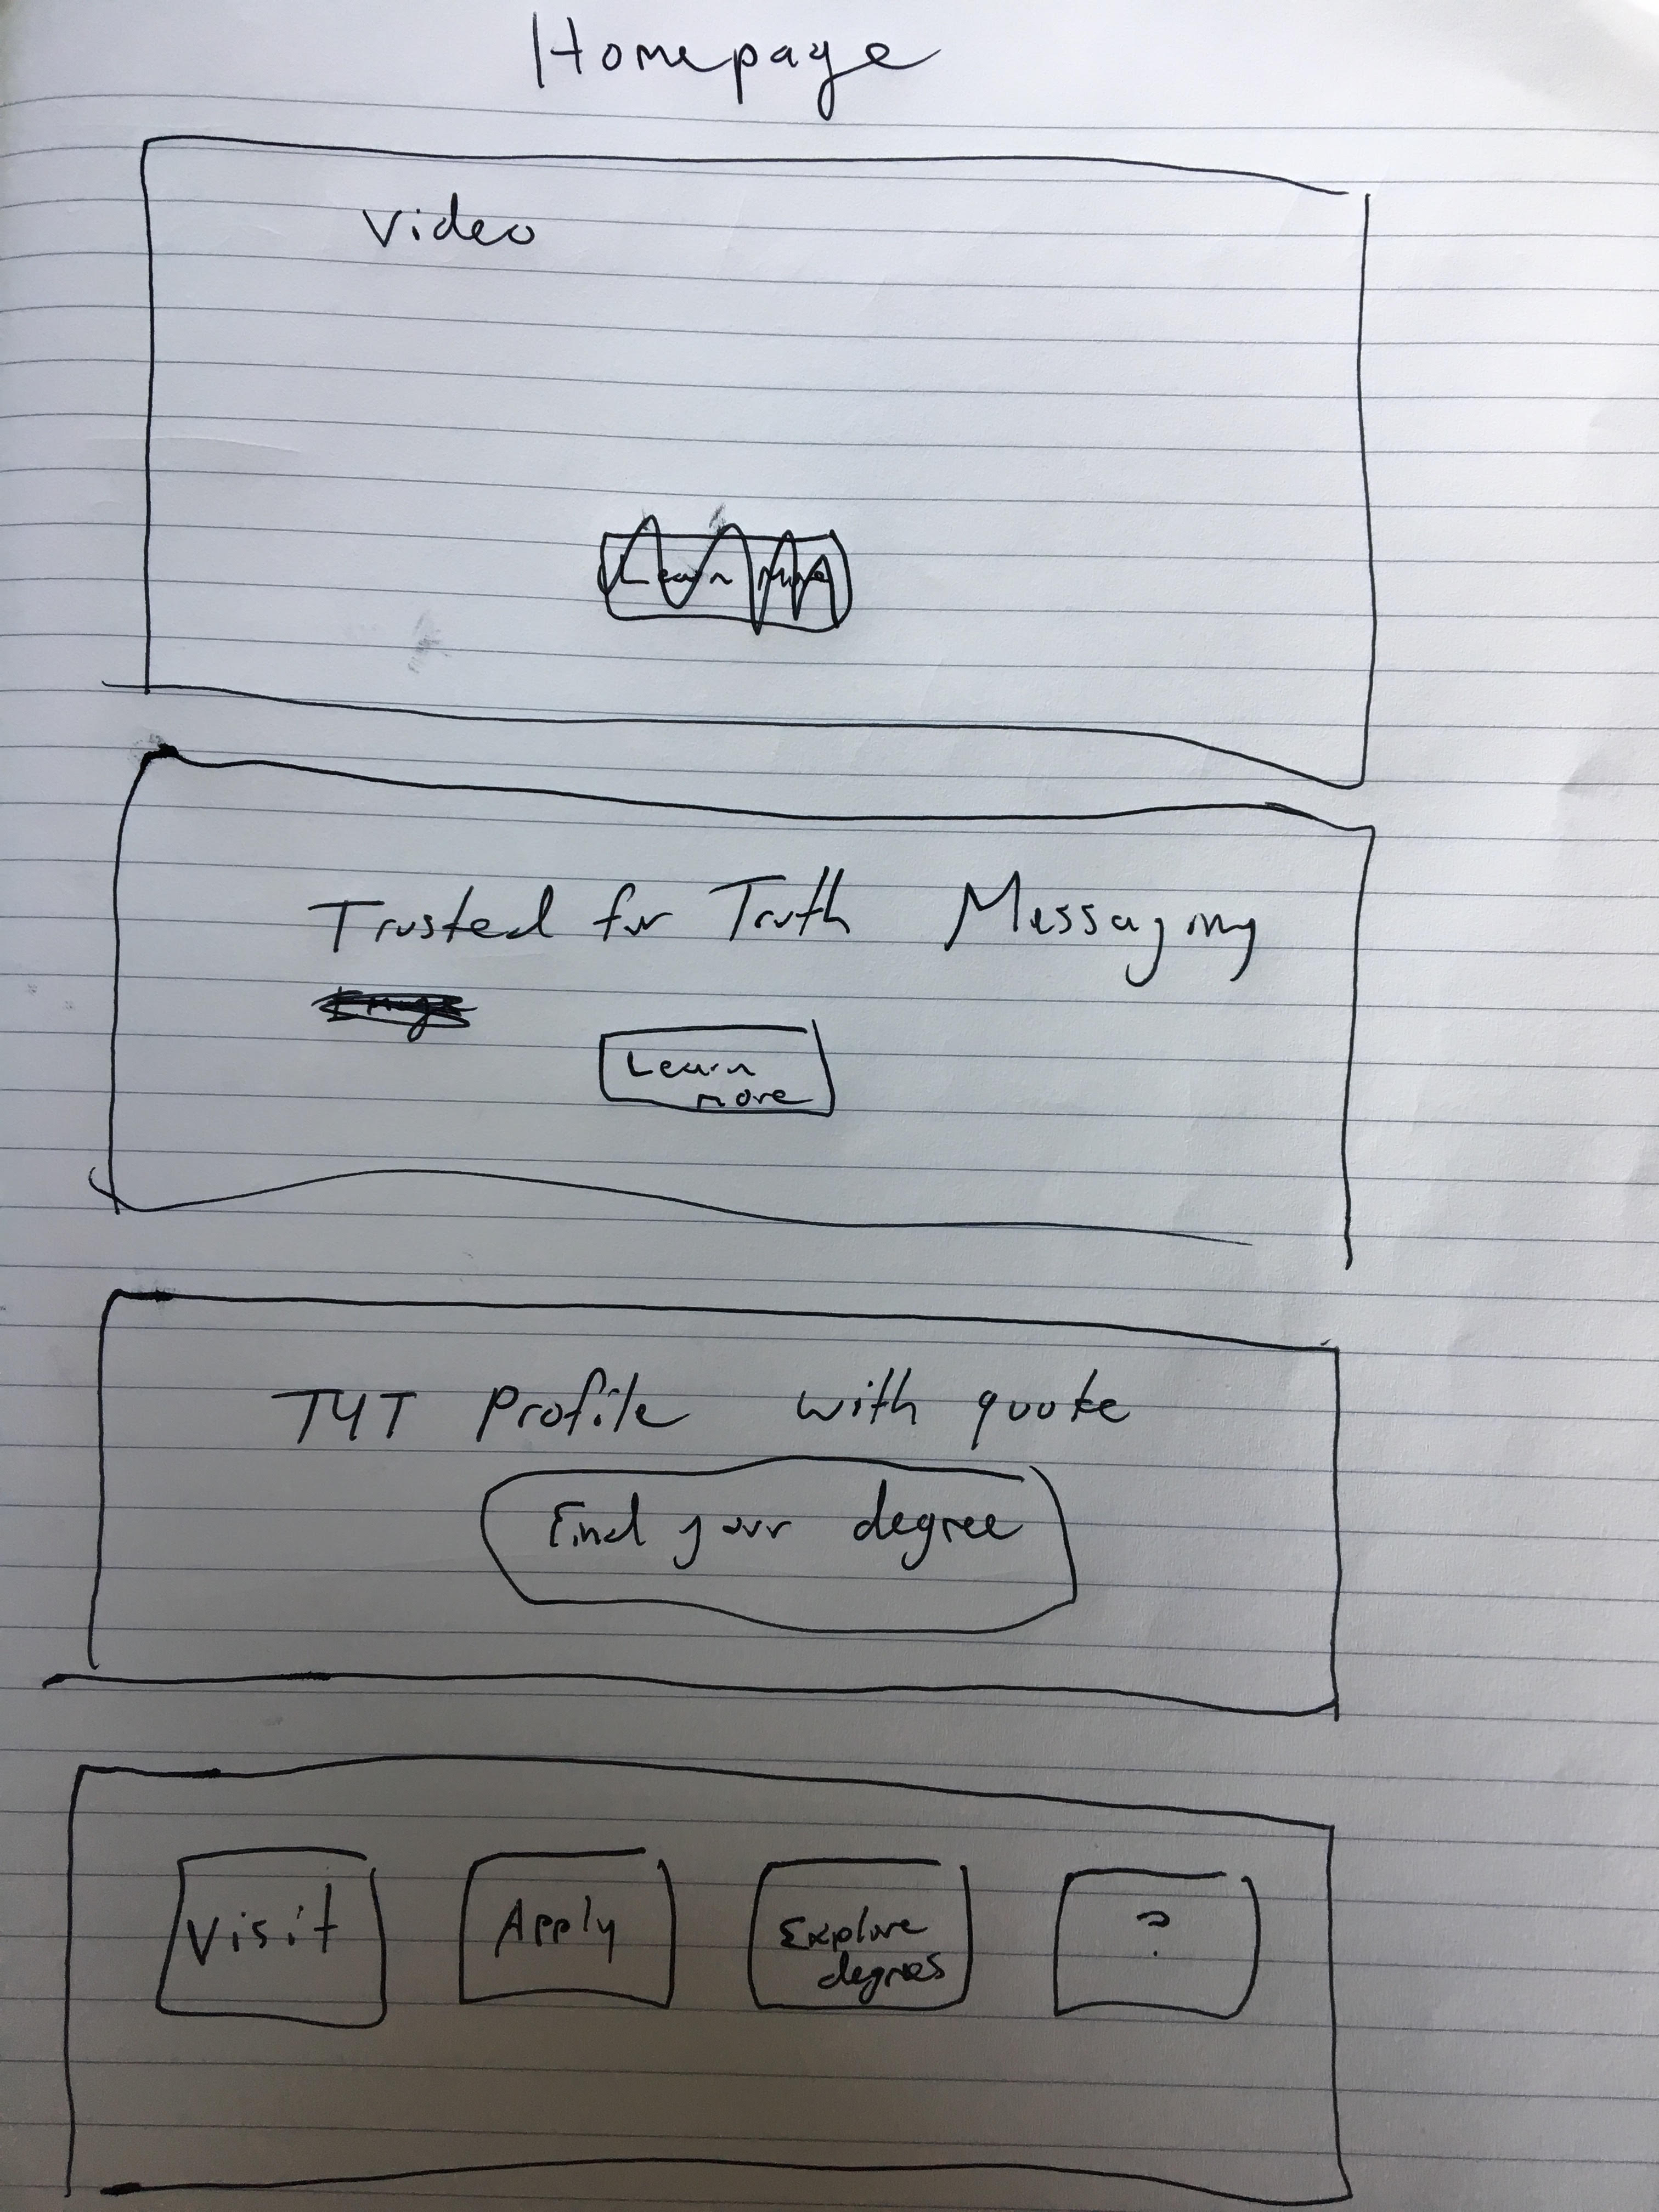 Very quick, rough sketch of the homepage idea